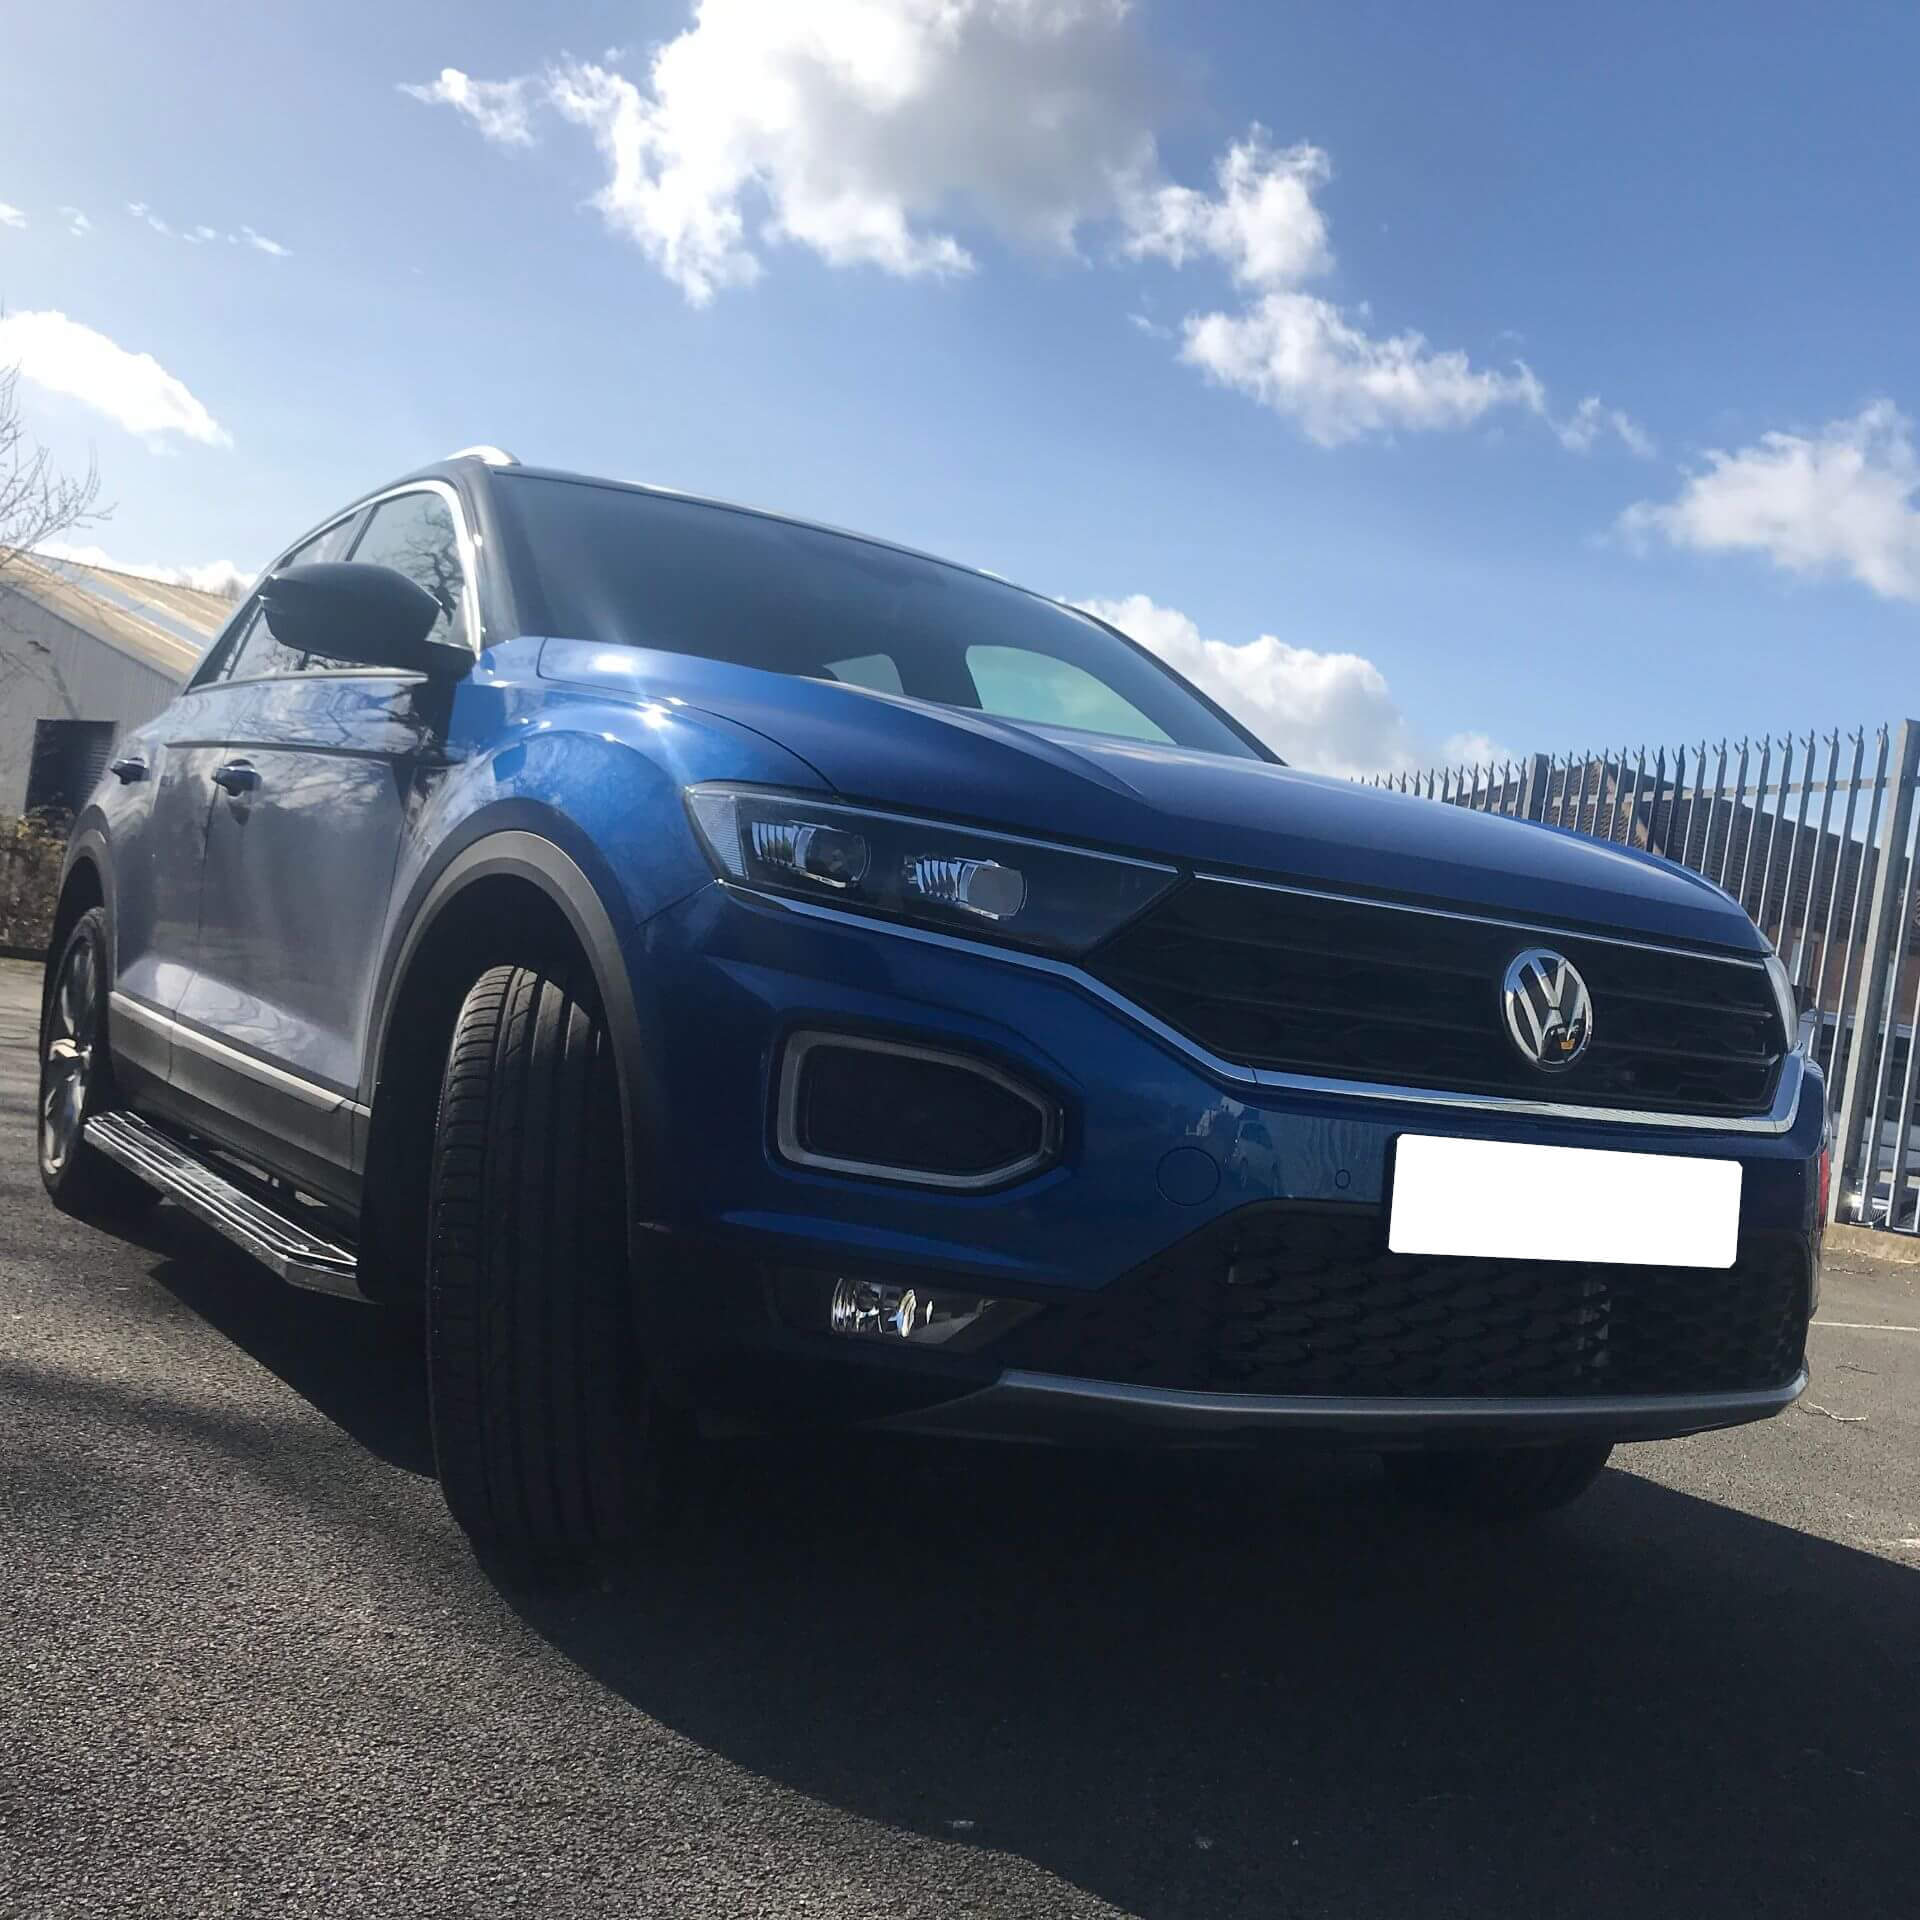 Direct4x4 accessories for Volkswagen T-Roc vehicles with a photo of a blue Volkswagen T-Roc under a blue and white sky